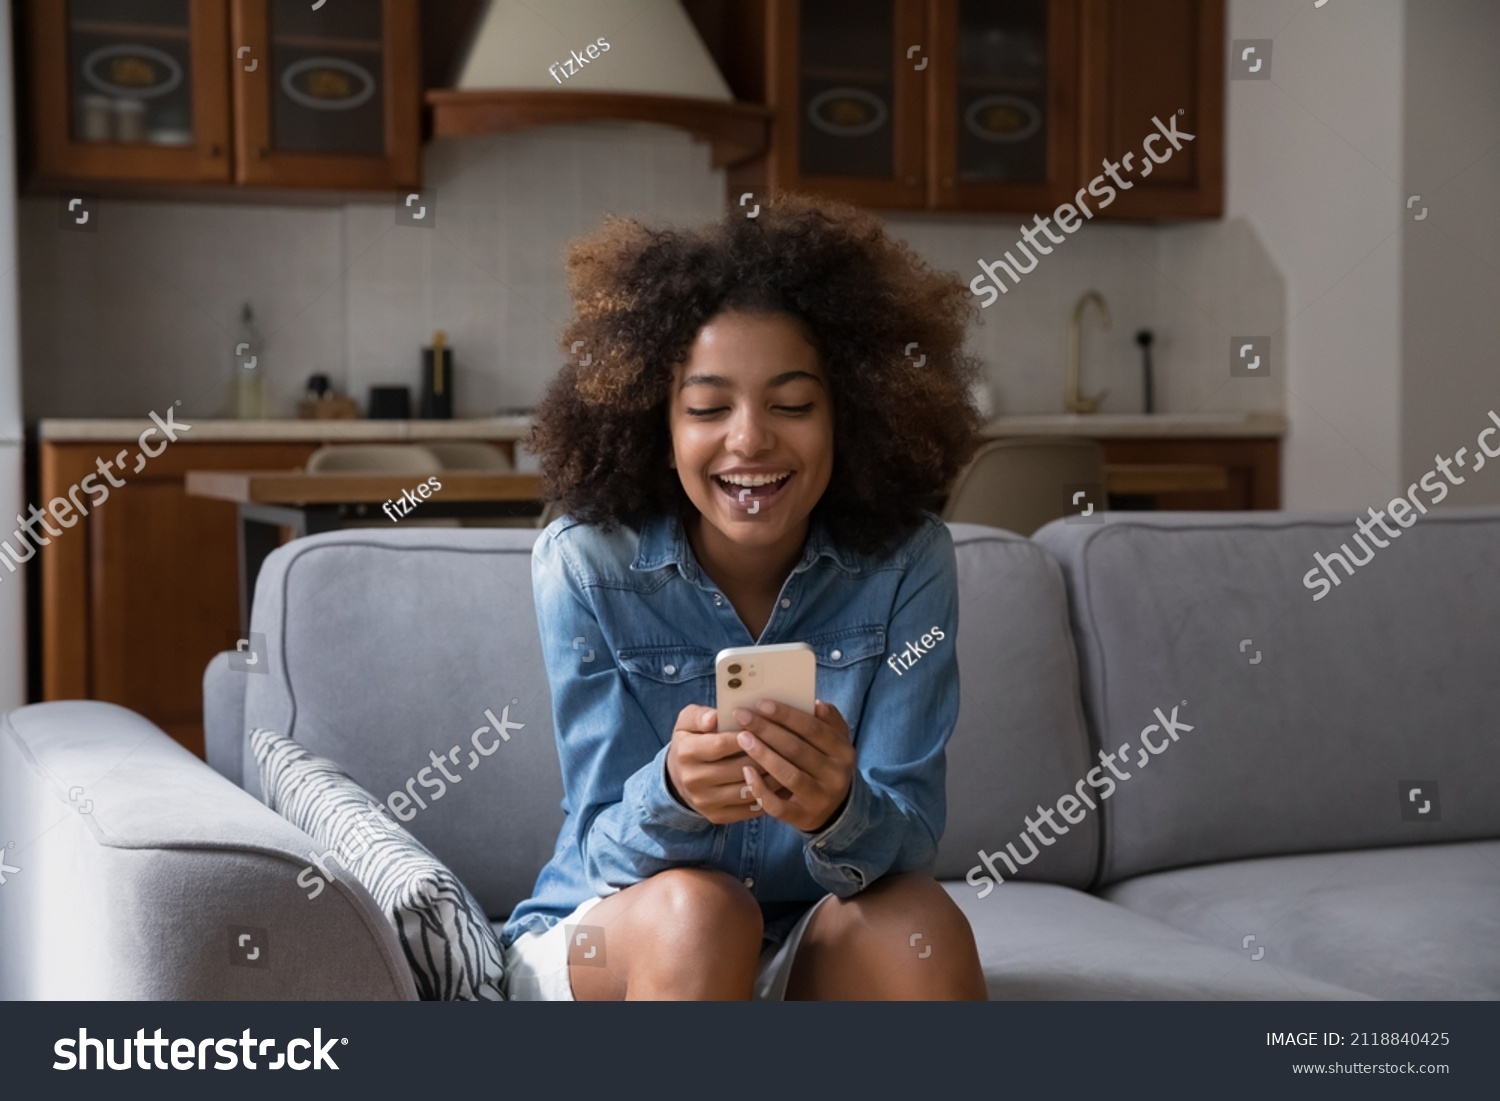 Cheerful happy gen Z teen girl receiving exciting message on smartphone, reading text in screen, smiling, laughing, sitting on couch, using online virtual app on mobile phone #2118840425